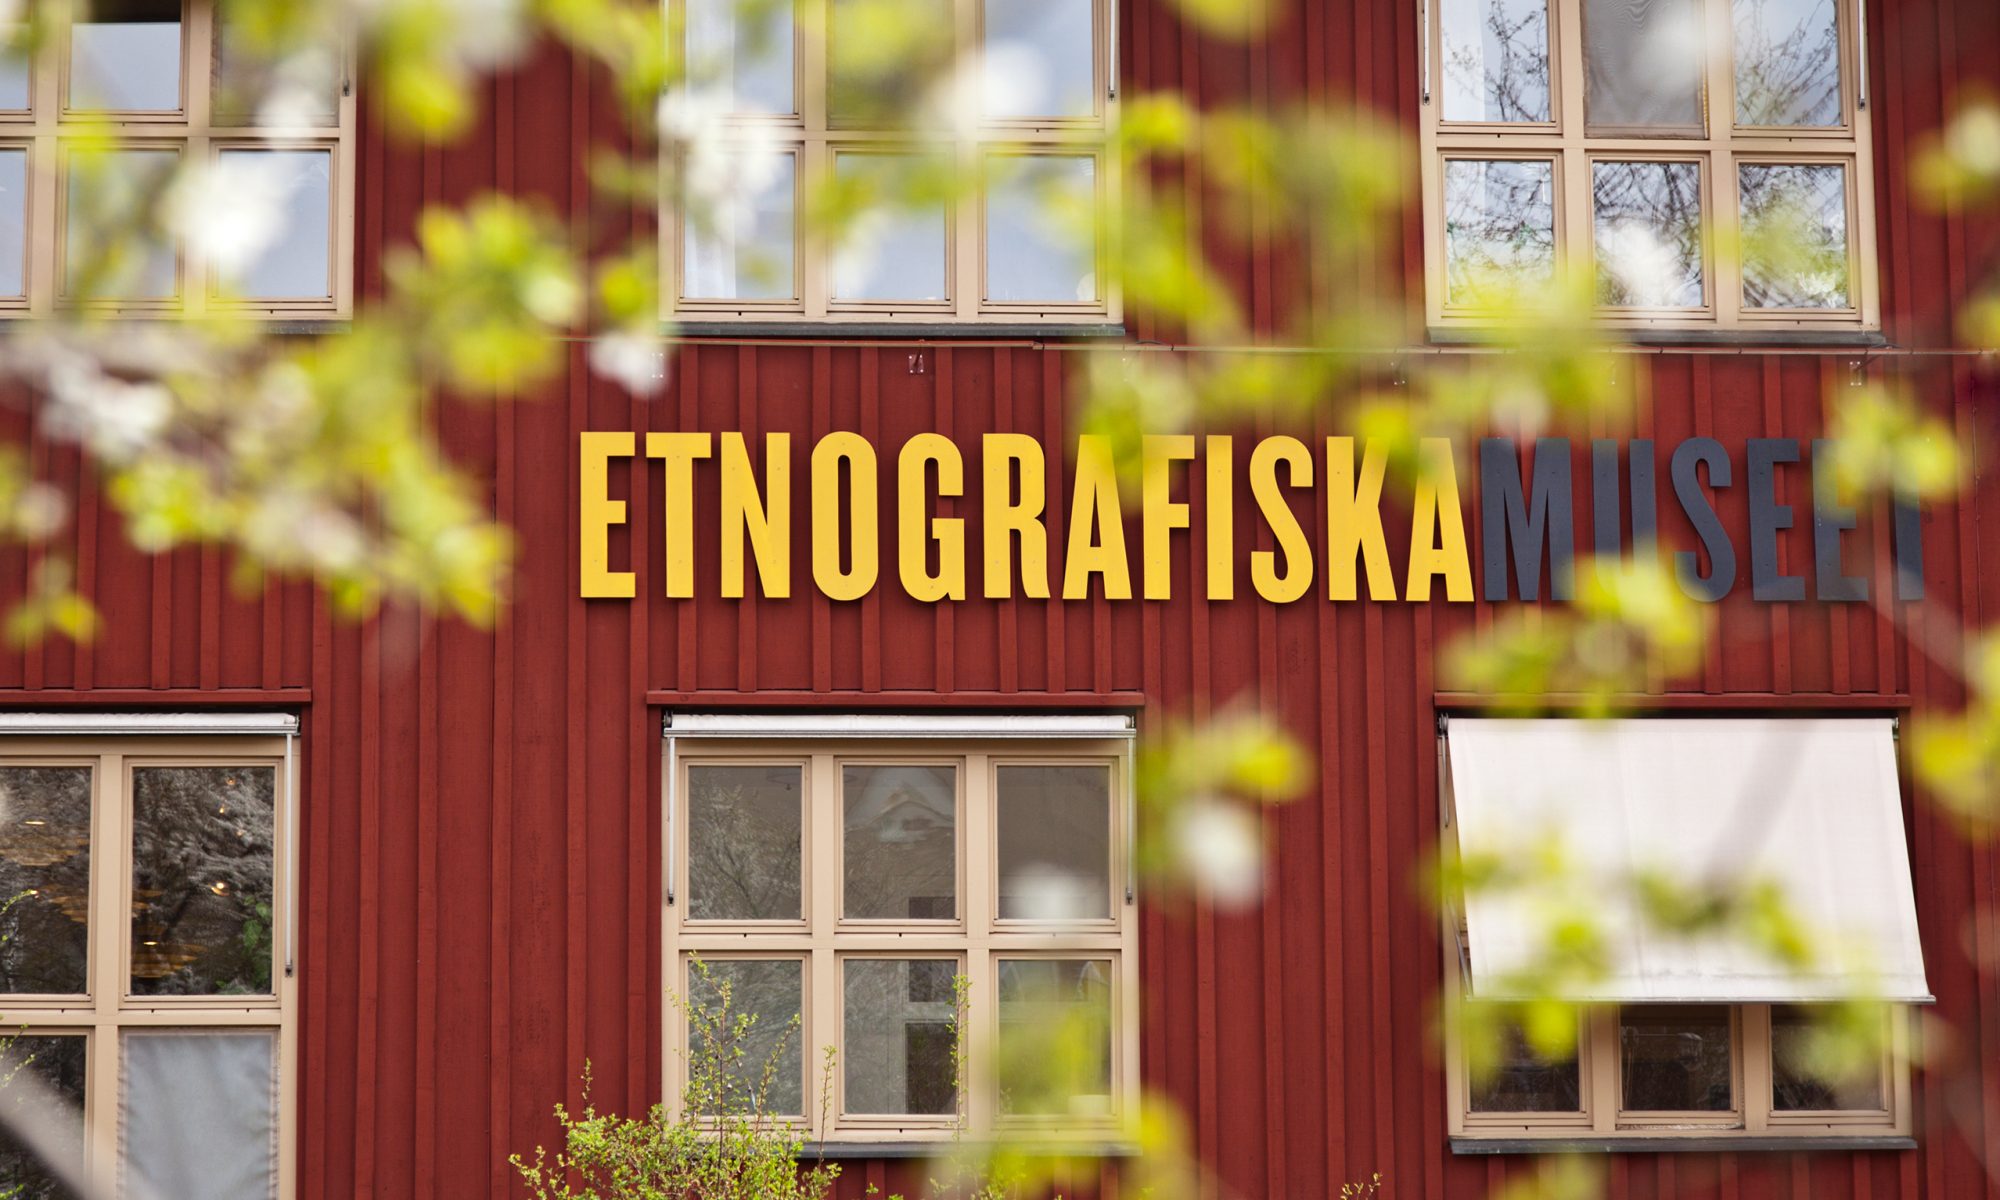 The Museum of Ethnography